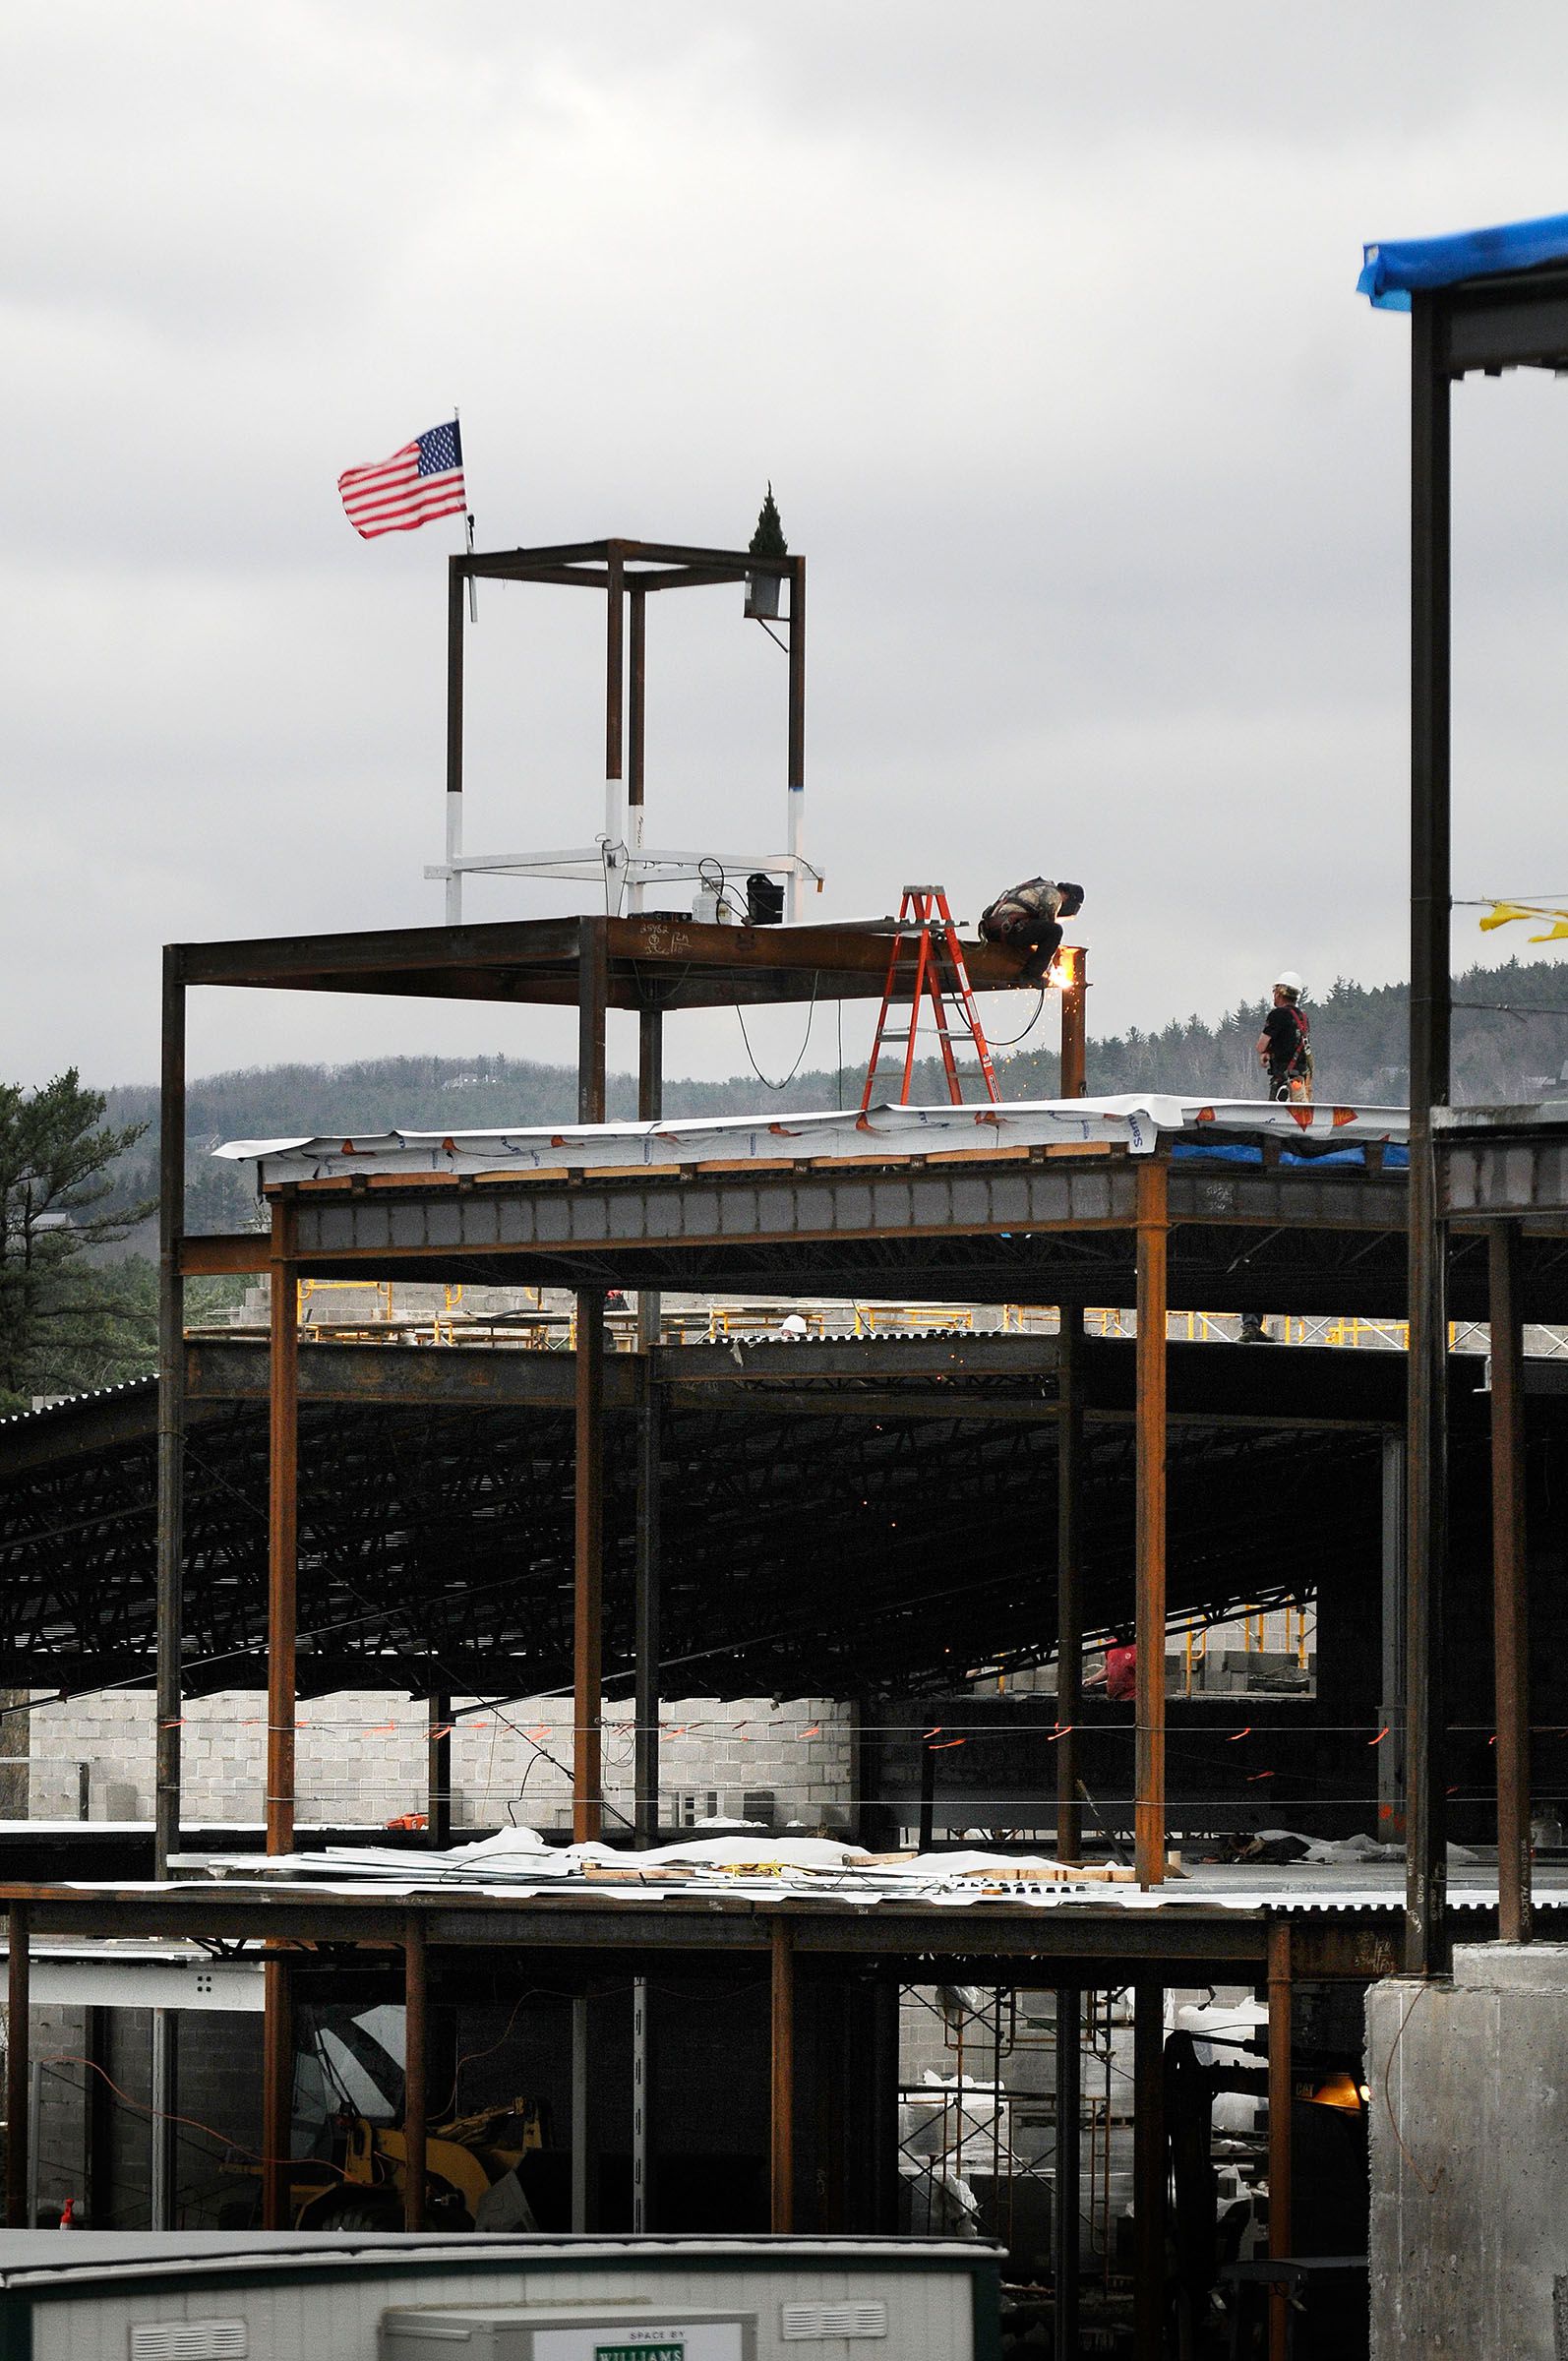 Construction of the Lebanon Middle School on Moulton Ave. in Lebanon, N.H., on April 28, 2011. (Valley News - Jason Johns) Copyright Valley News. May not be reprinted or used online without permission. Send requests to permission@vnews.com.